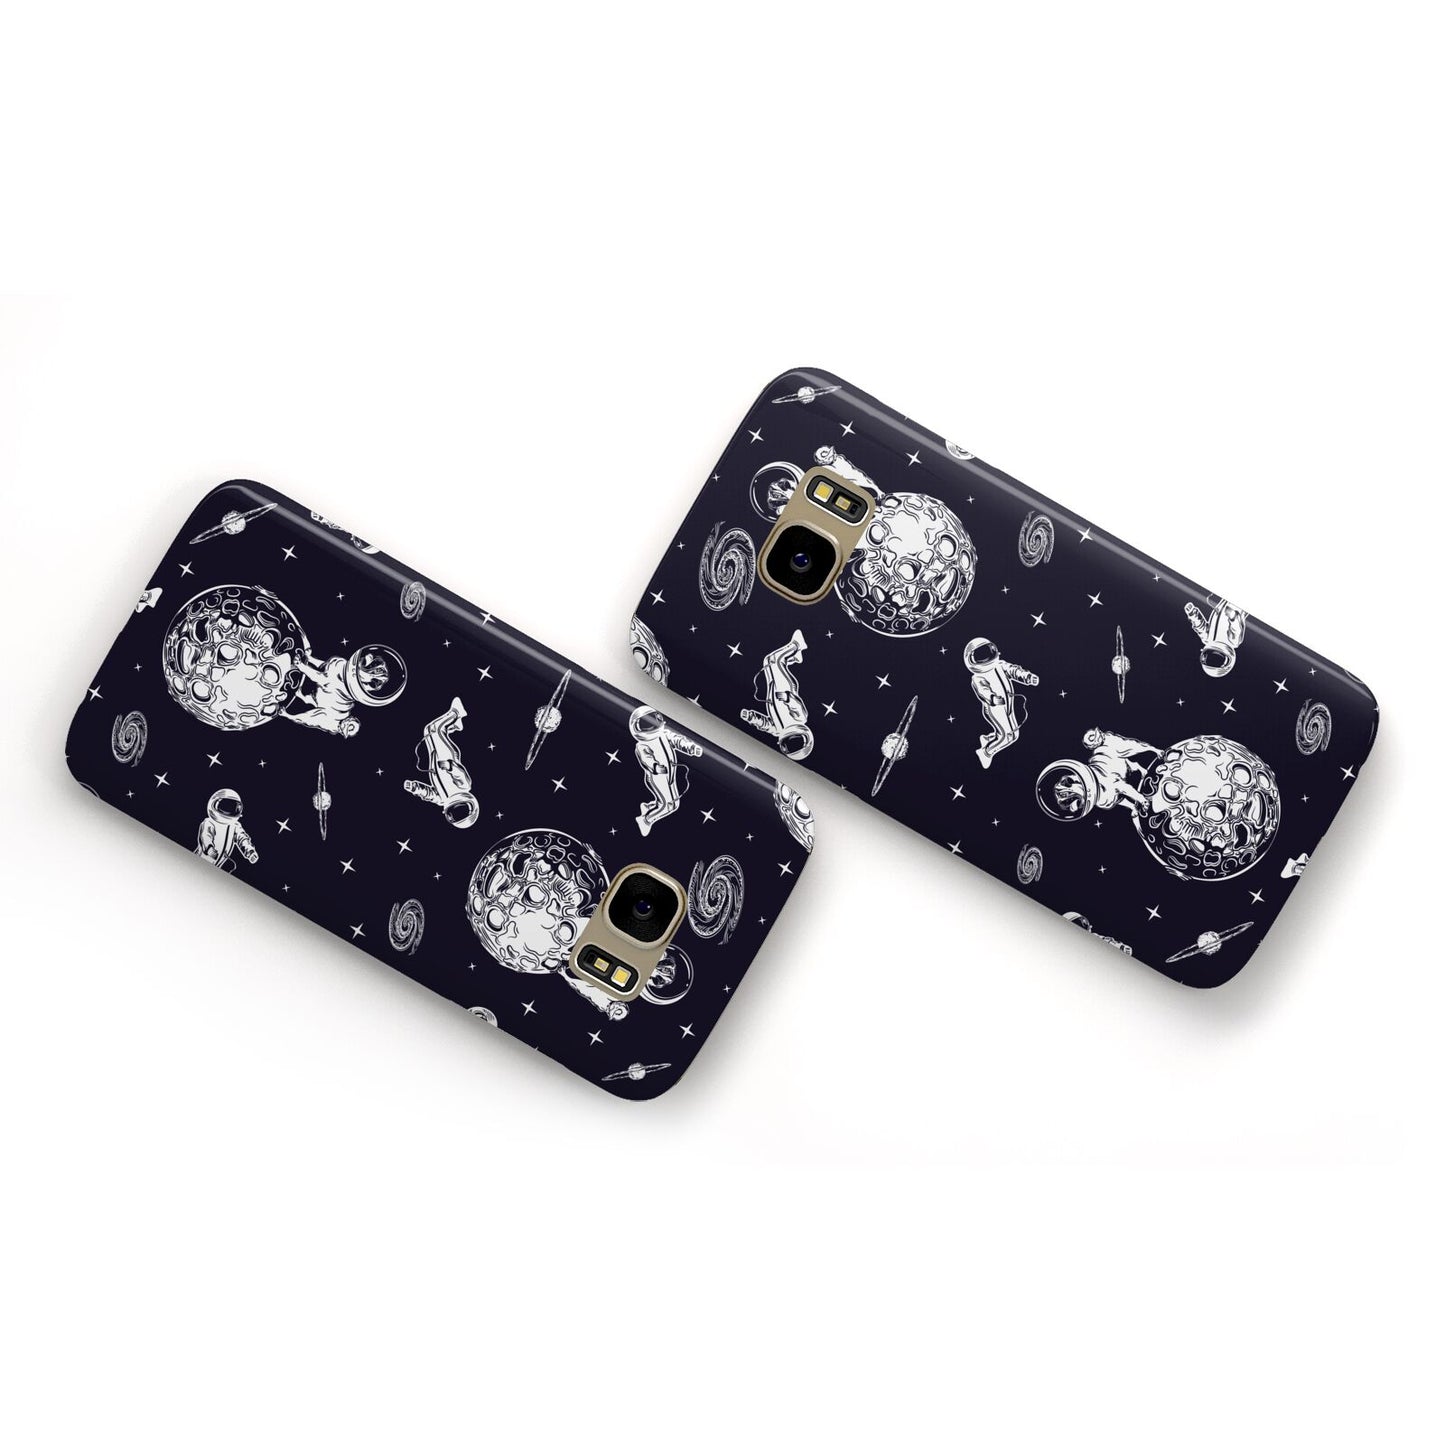 Pug in Space Samsung Galaxy Case Flat Overview